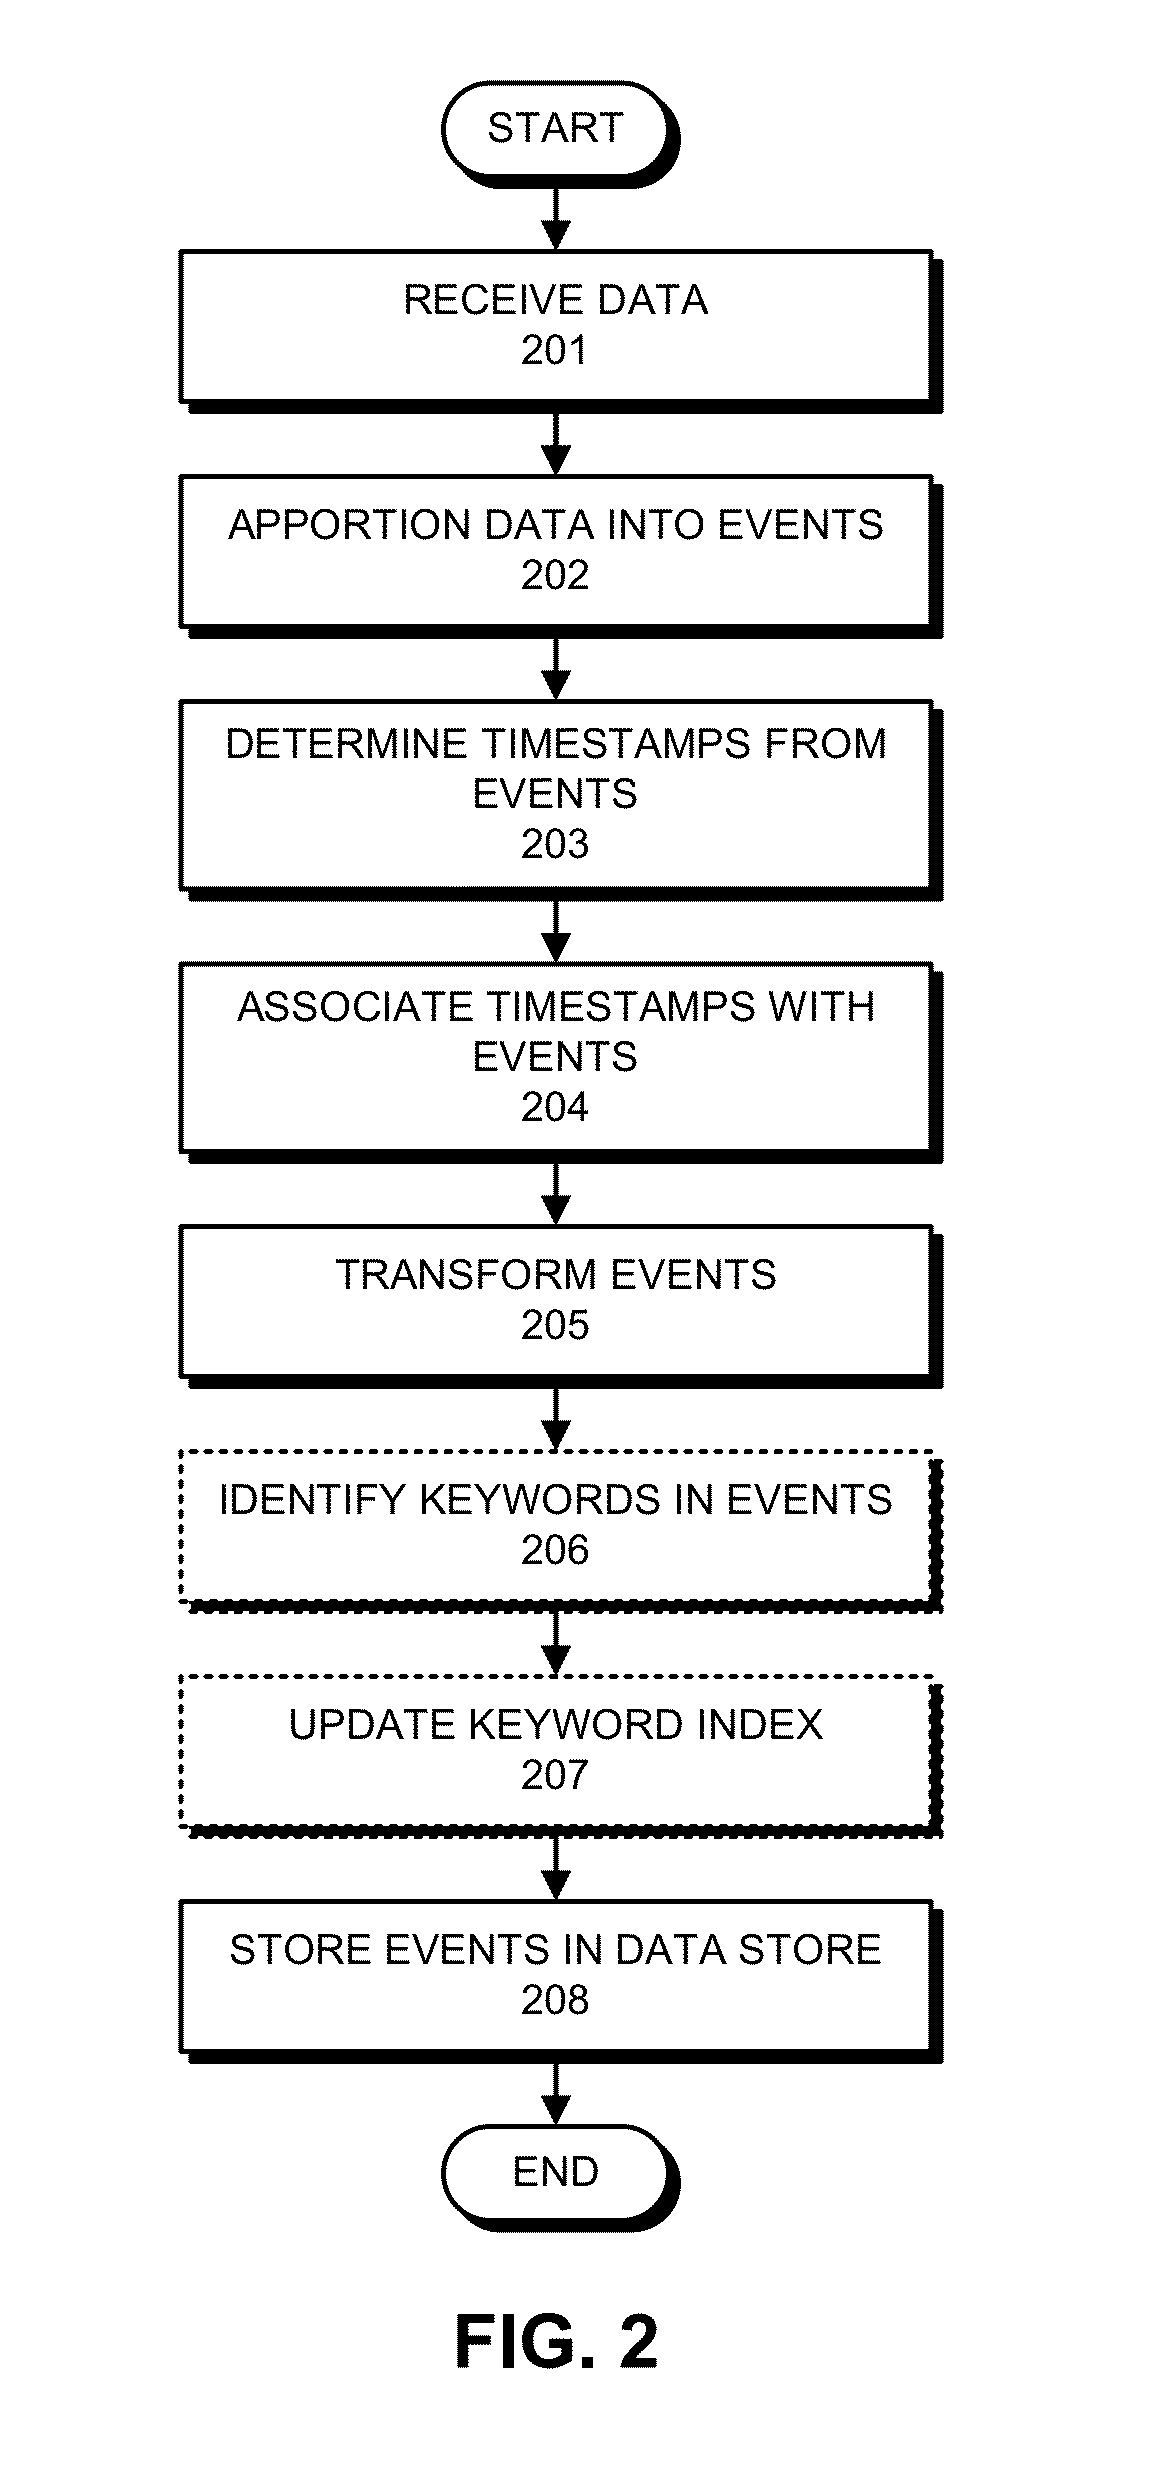 Grouping and managing event streams generated from captured network data